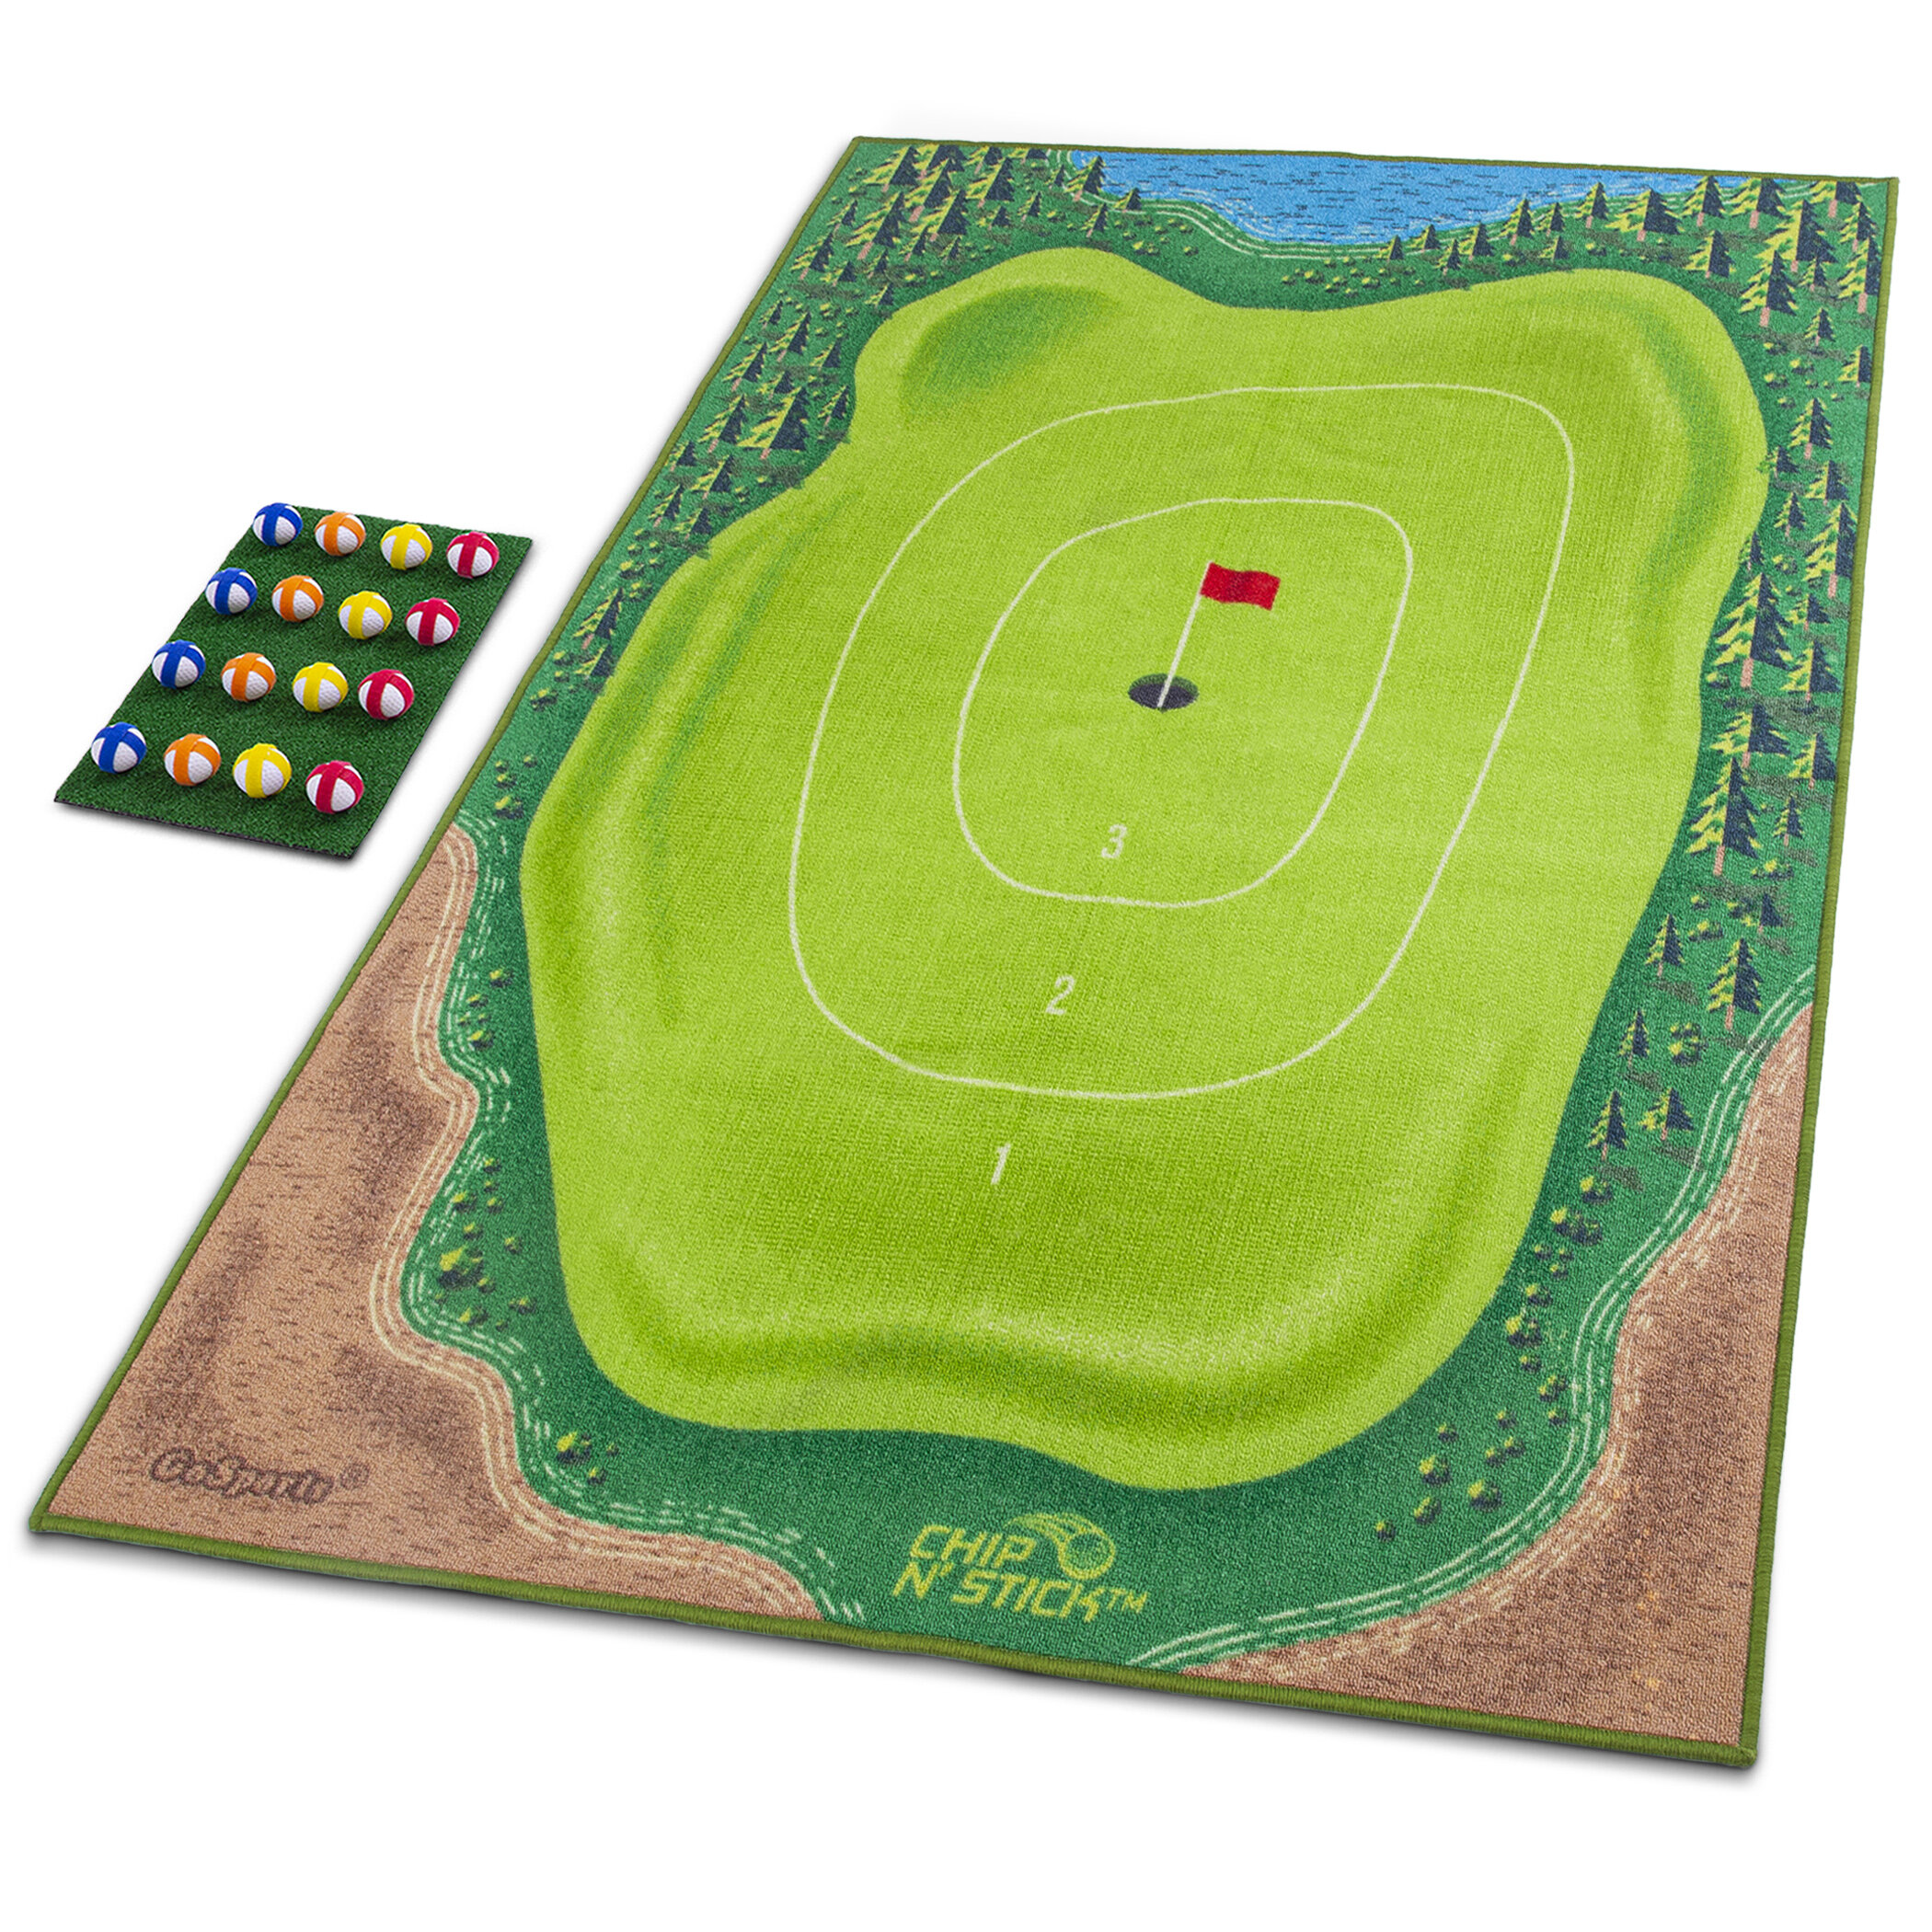 GoSports Par 4 Dice Golf Tabletop Game - Quick, Fun Games for All Ages!